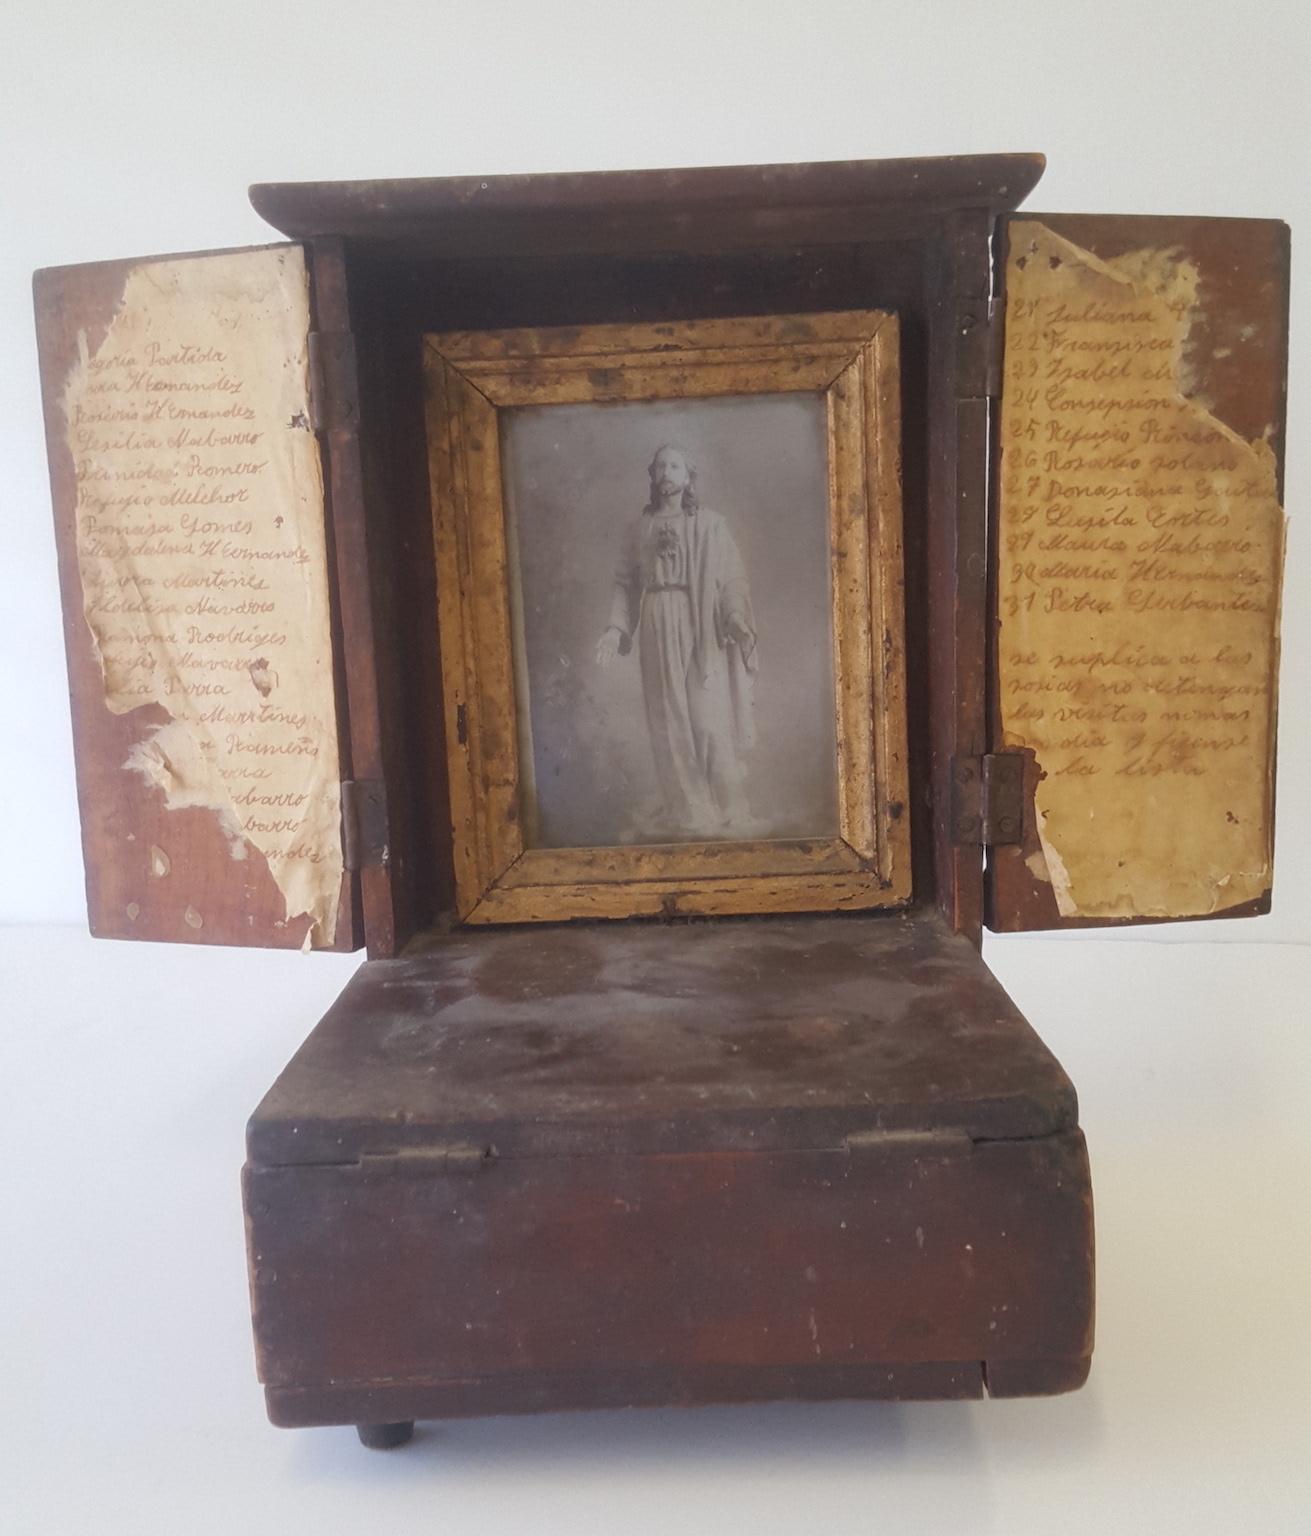 A small wooden altar with a framed guilt framed print of Christ used for personal devotion and an interior locked coin box for offerings.